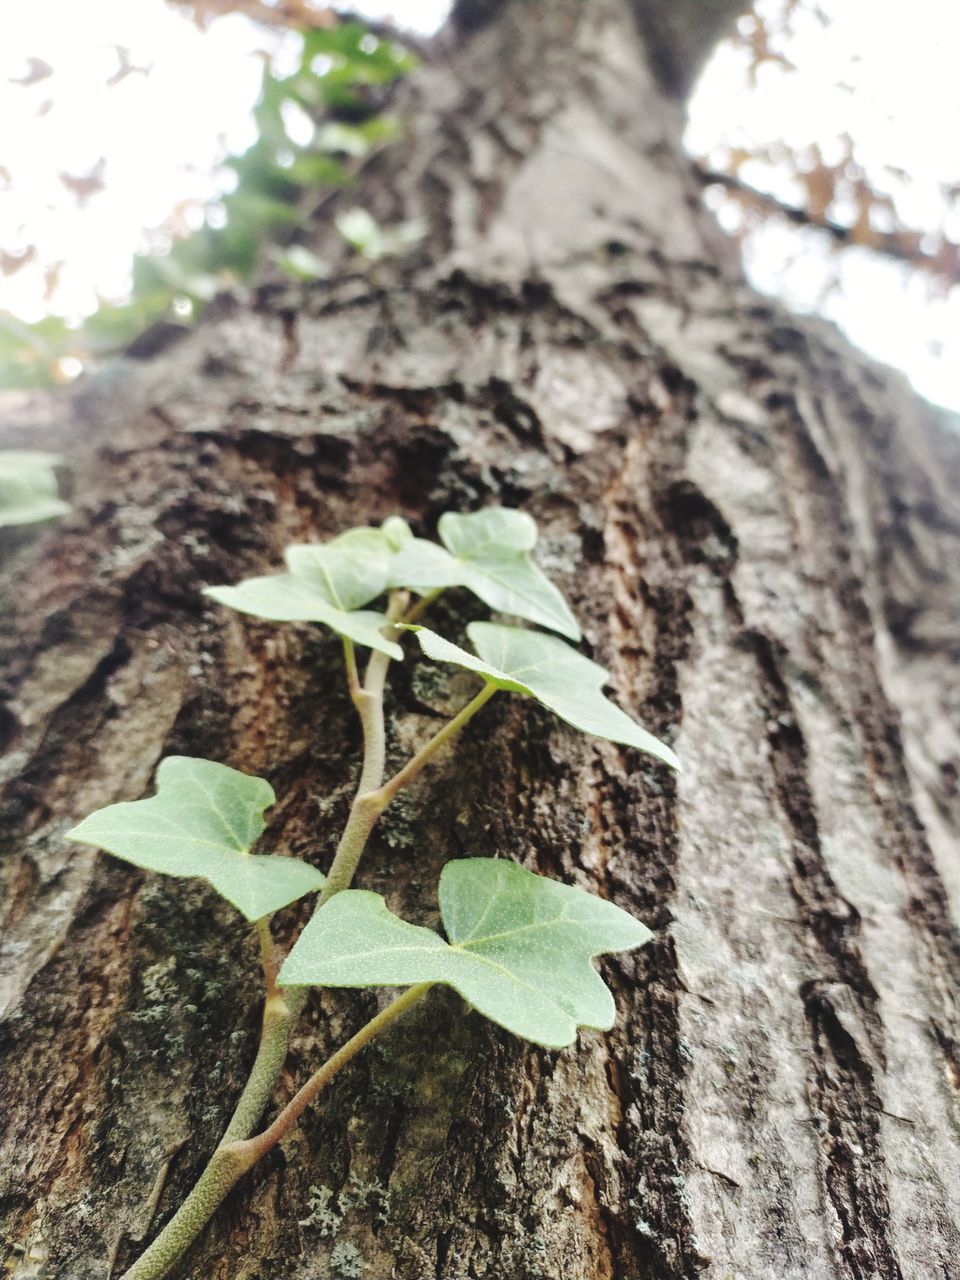 CLOSE-UP OF PLANT ON TREE TRUNK